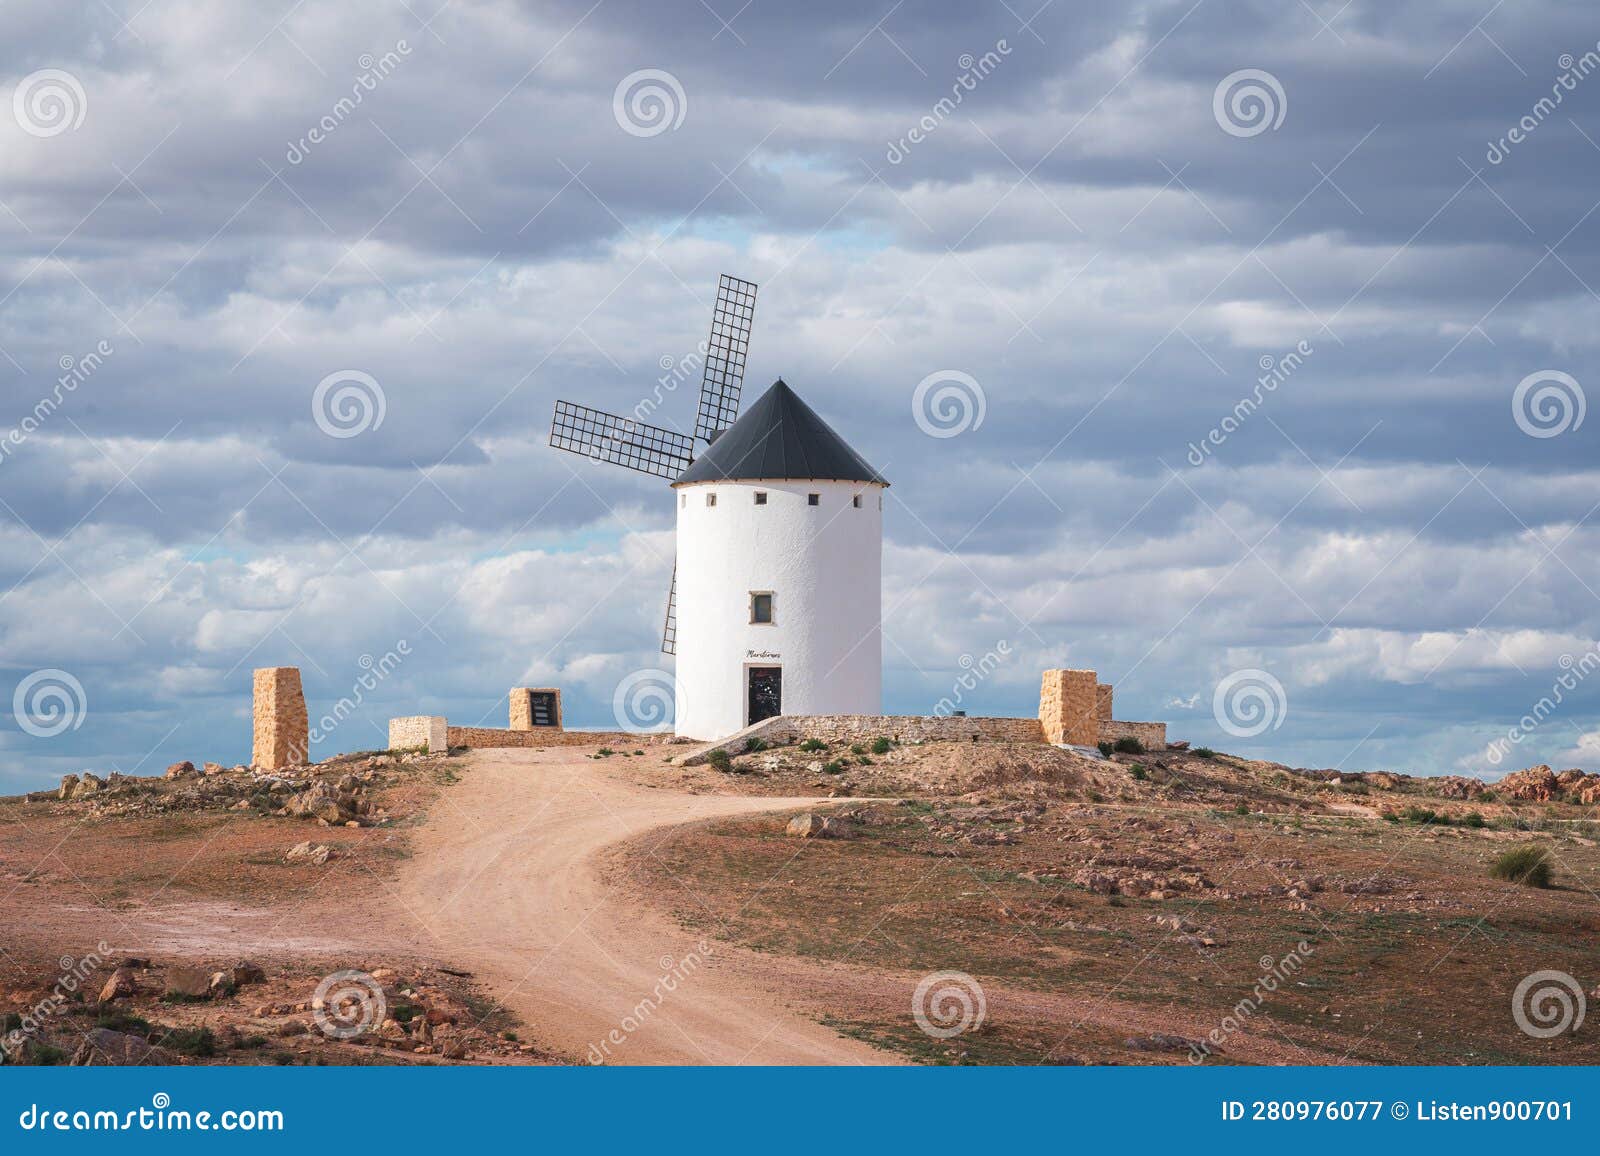 old historic windmills on the hill of herencia, consuegra, spain